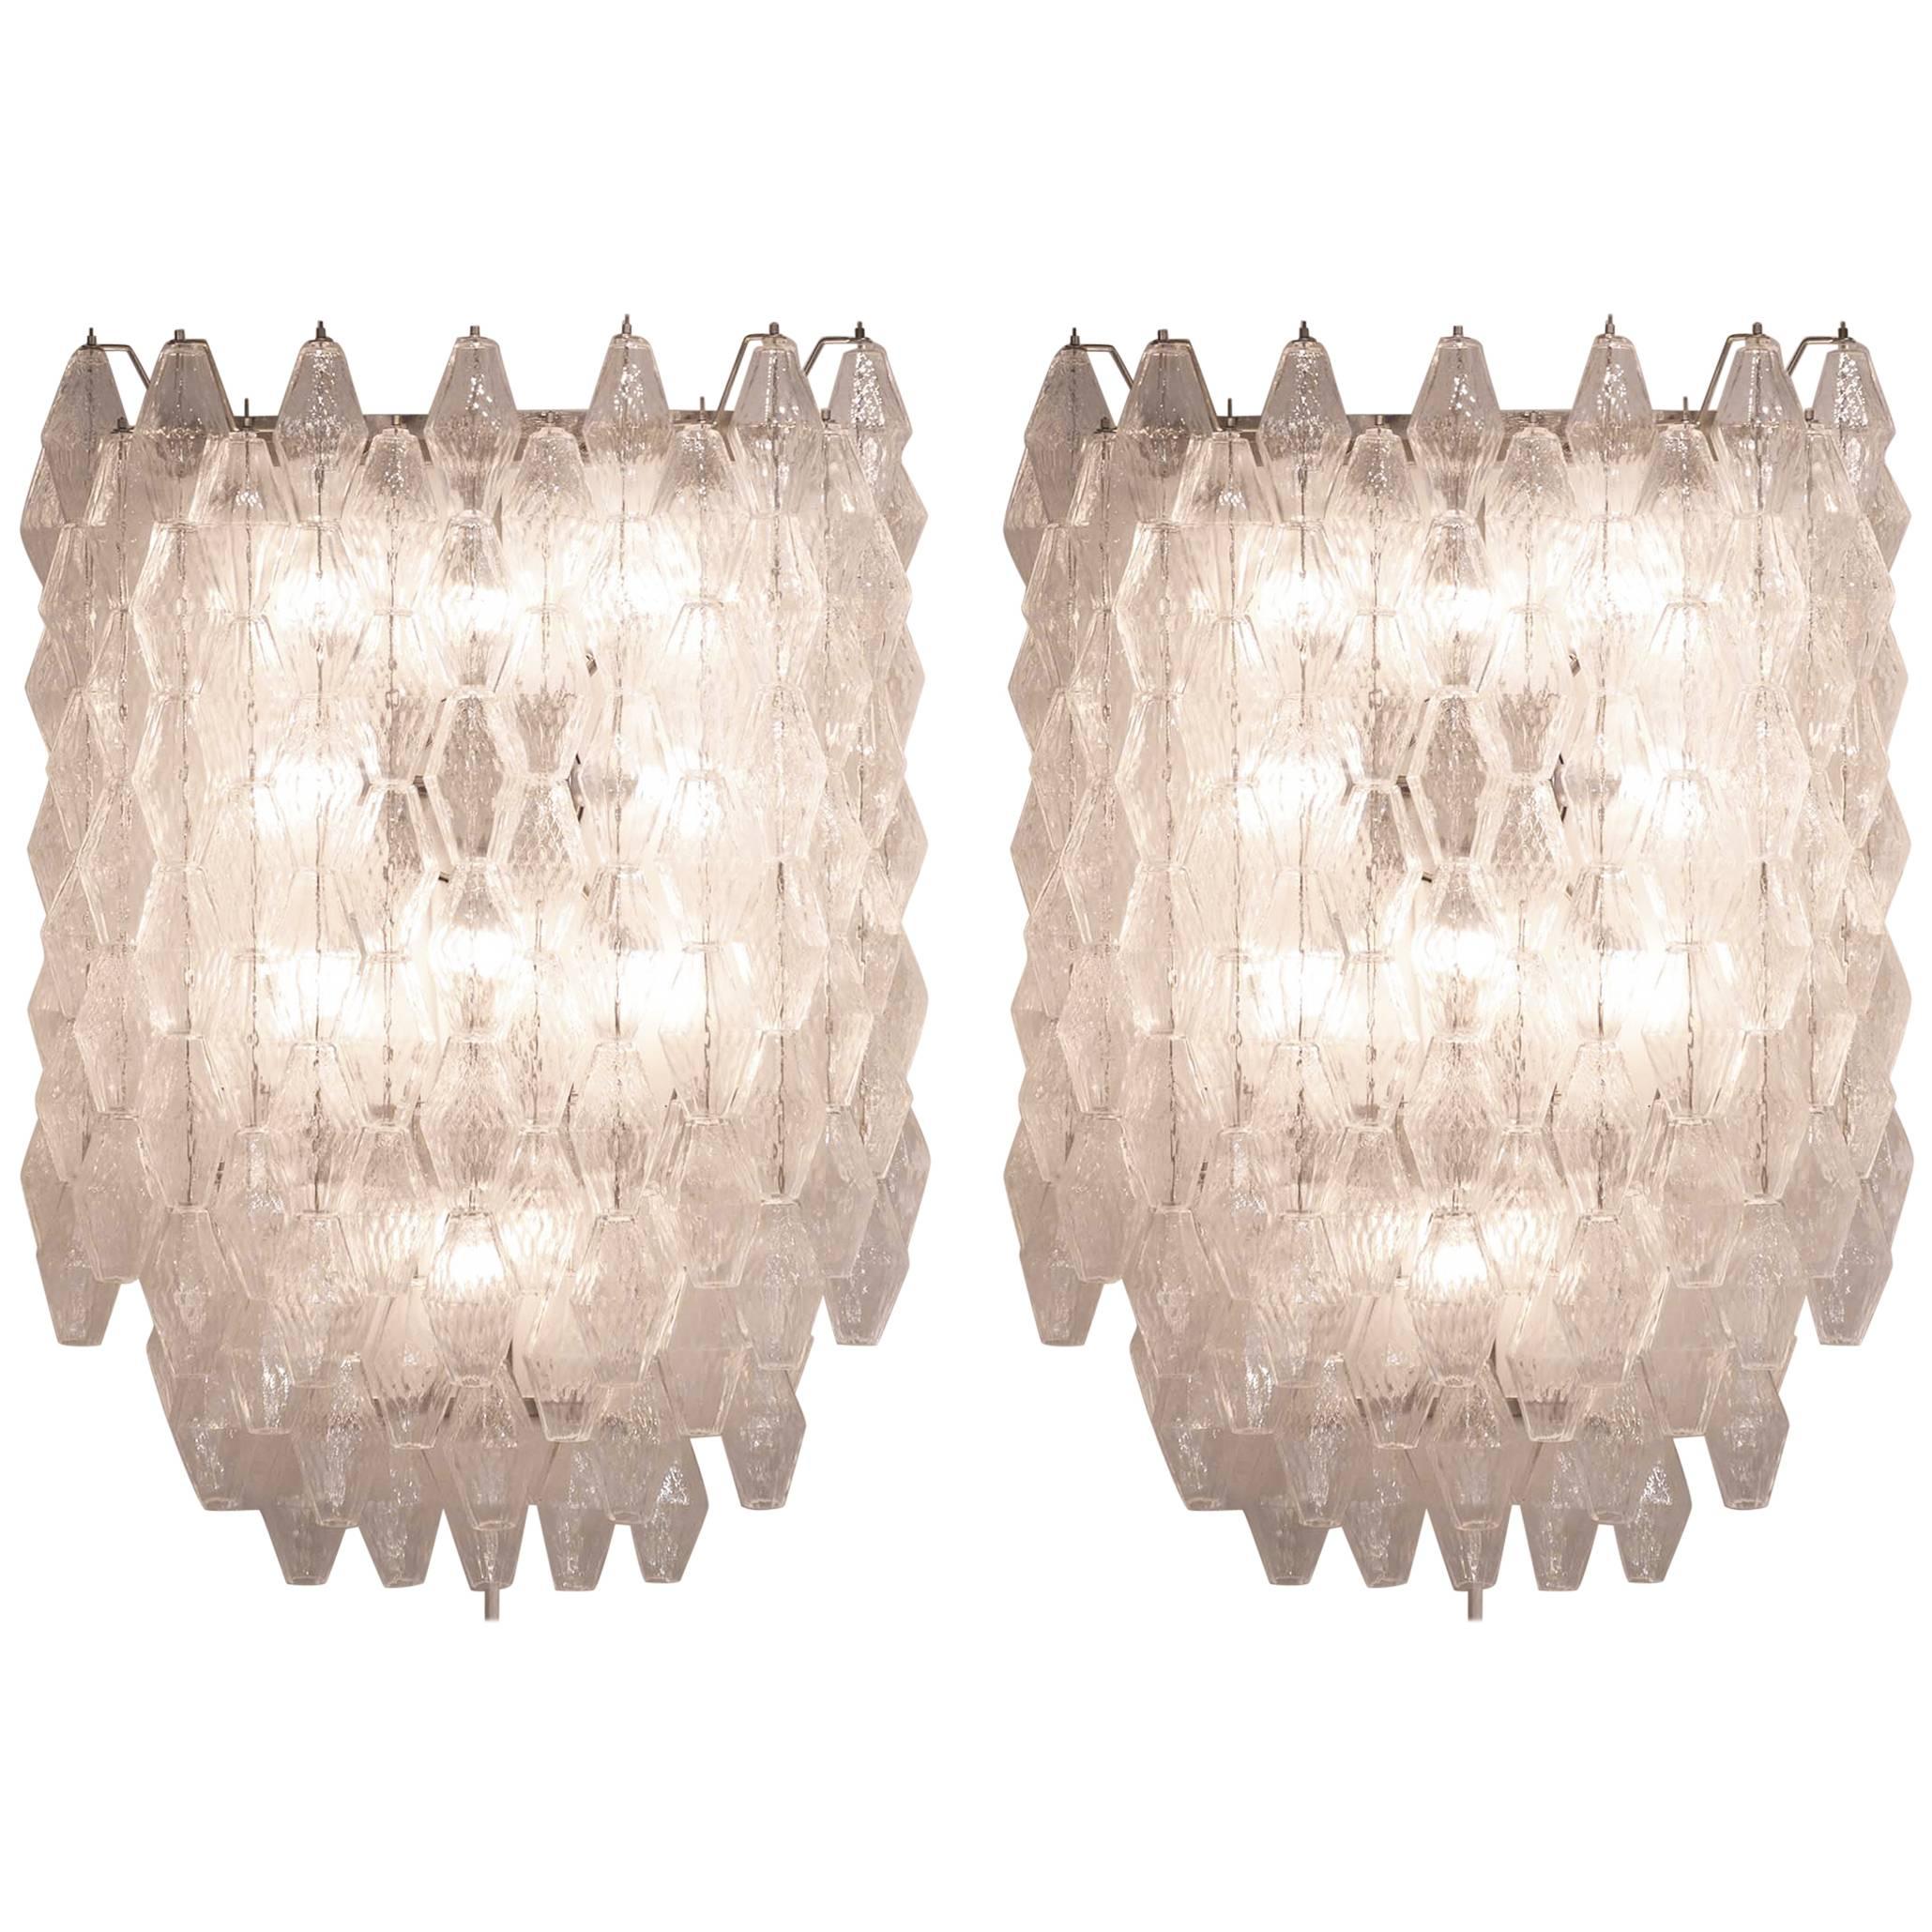 Pair of wall lights by Carlo Scarpa for Venini, 1950s